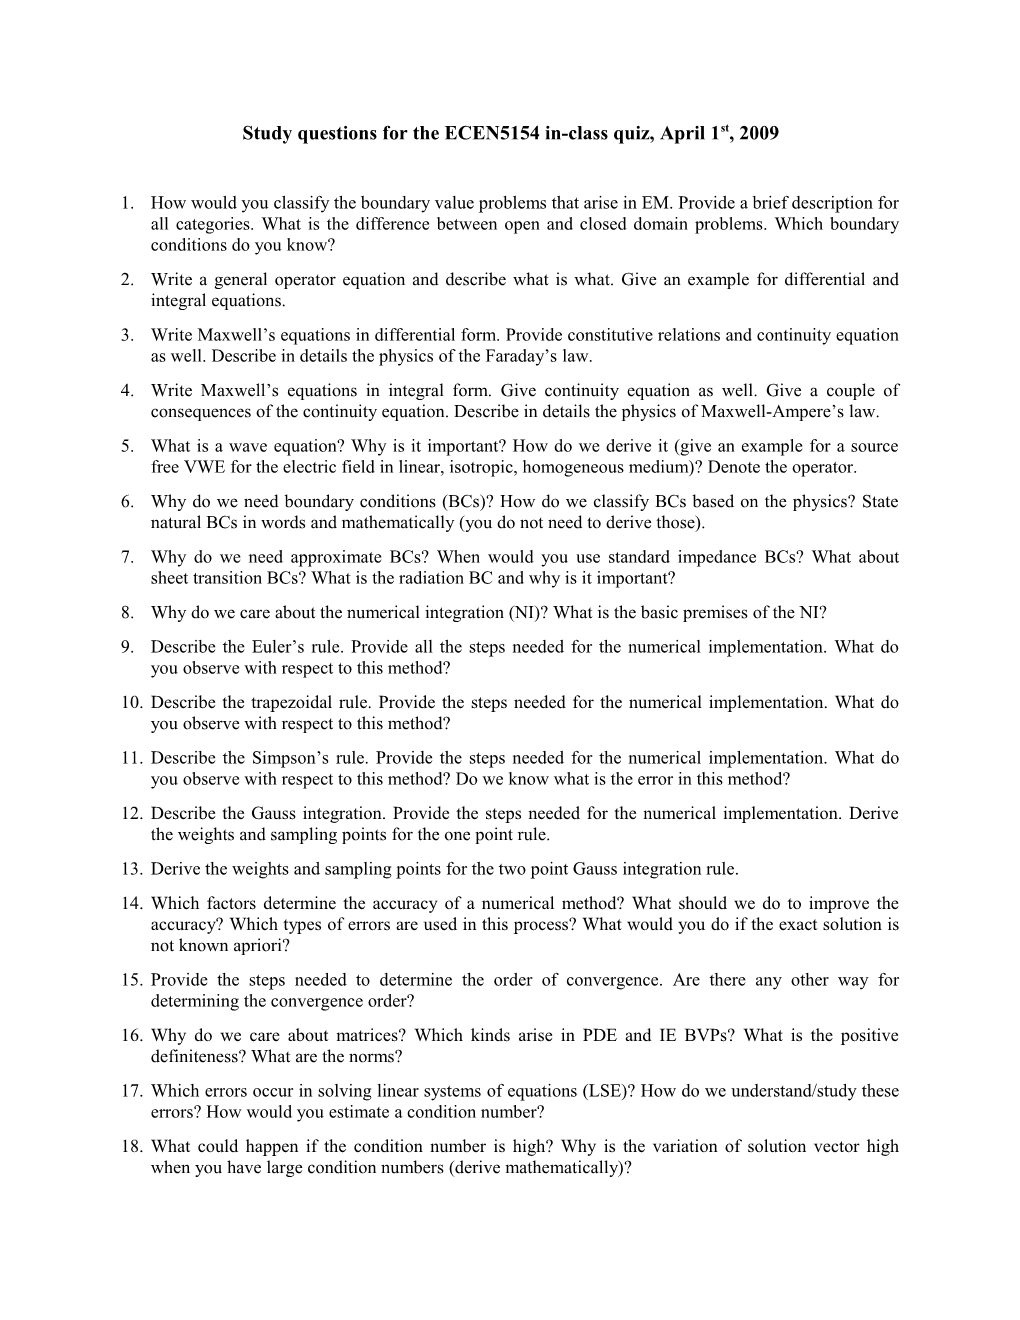 Study Questions for the ECEN5004 In-Class Quiz